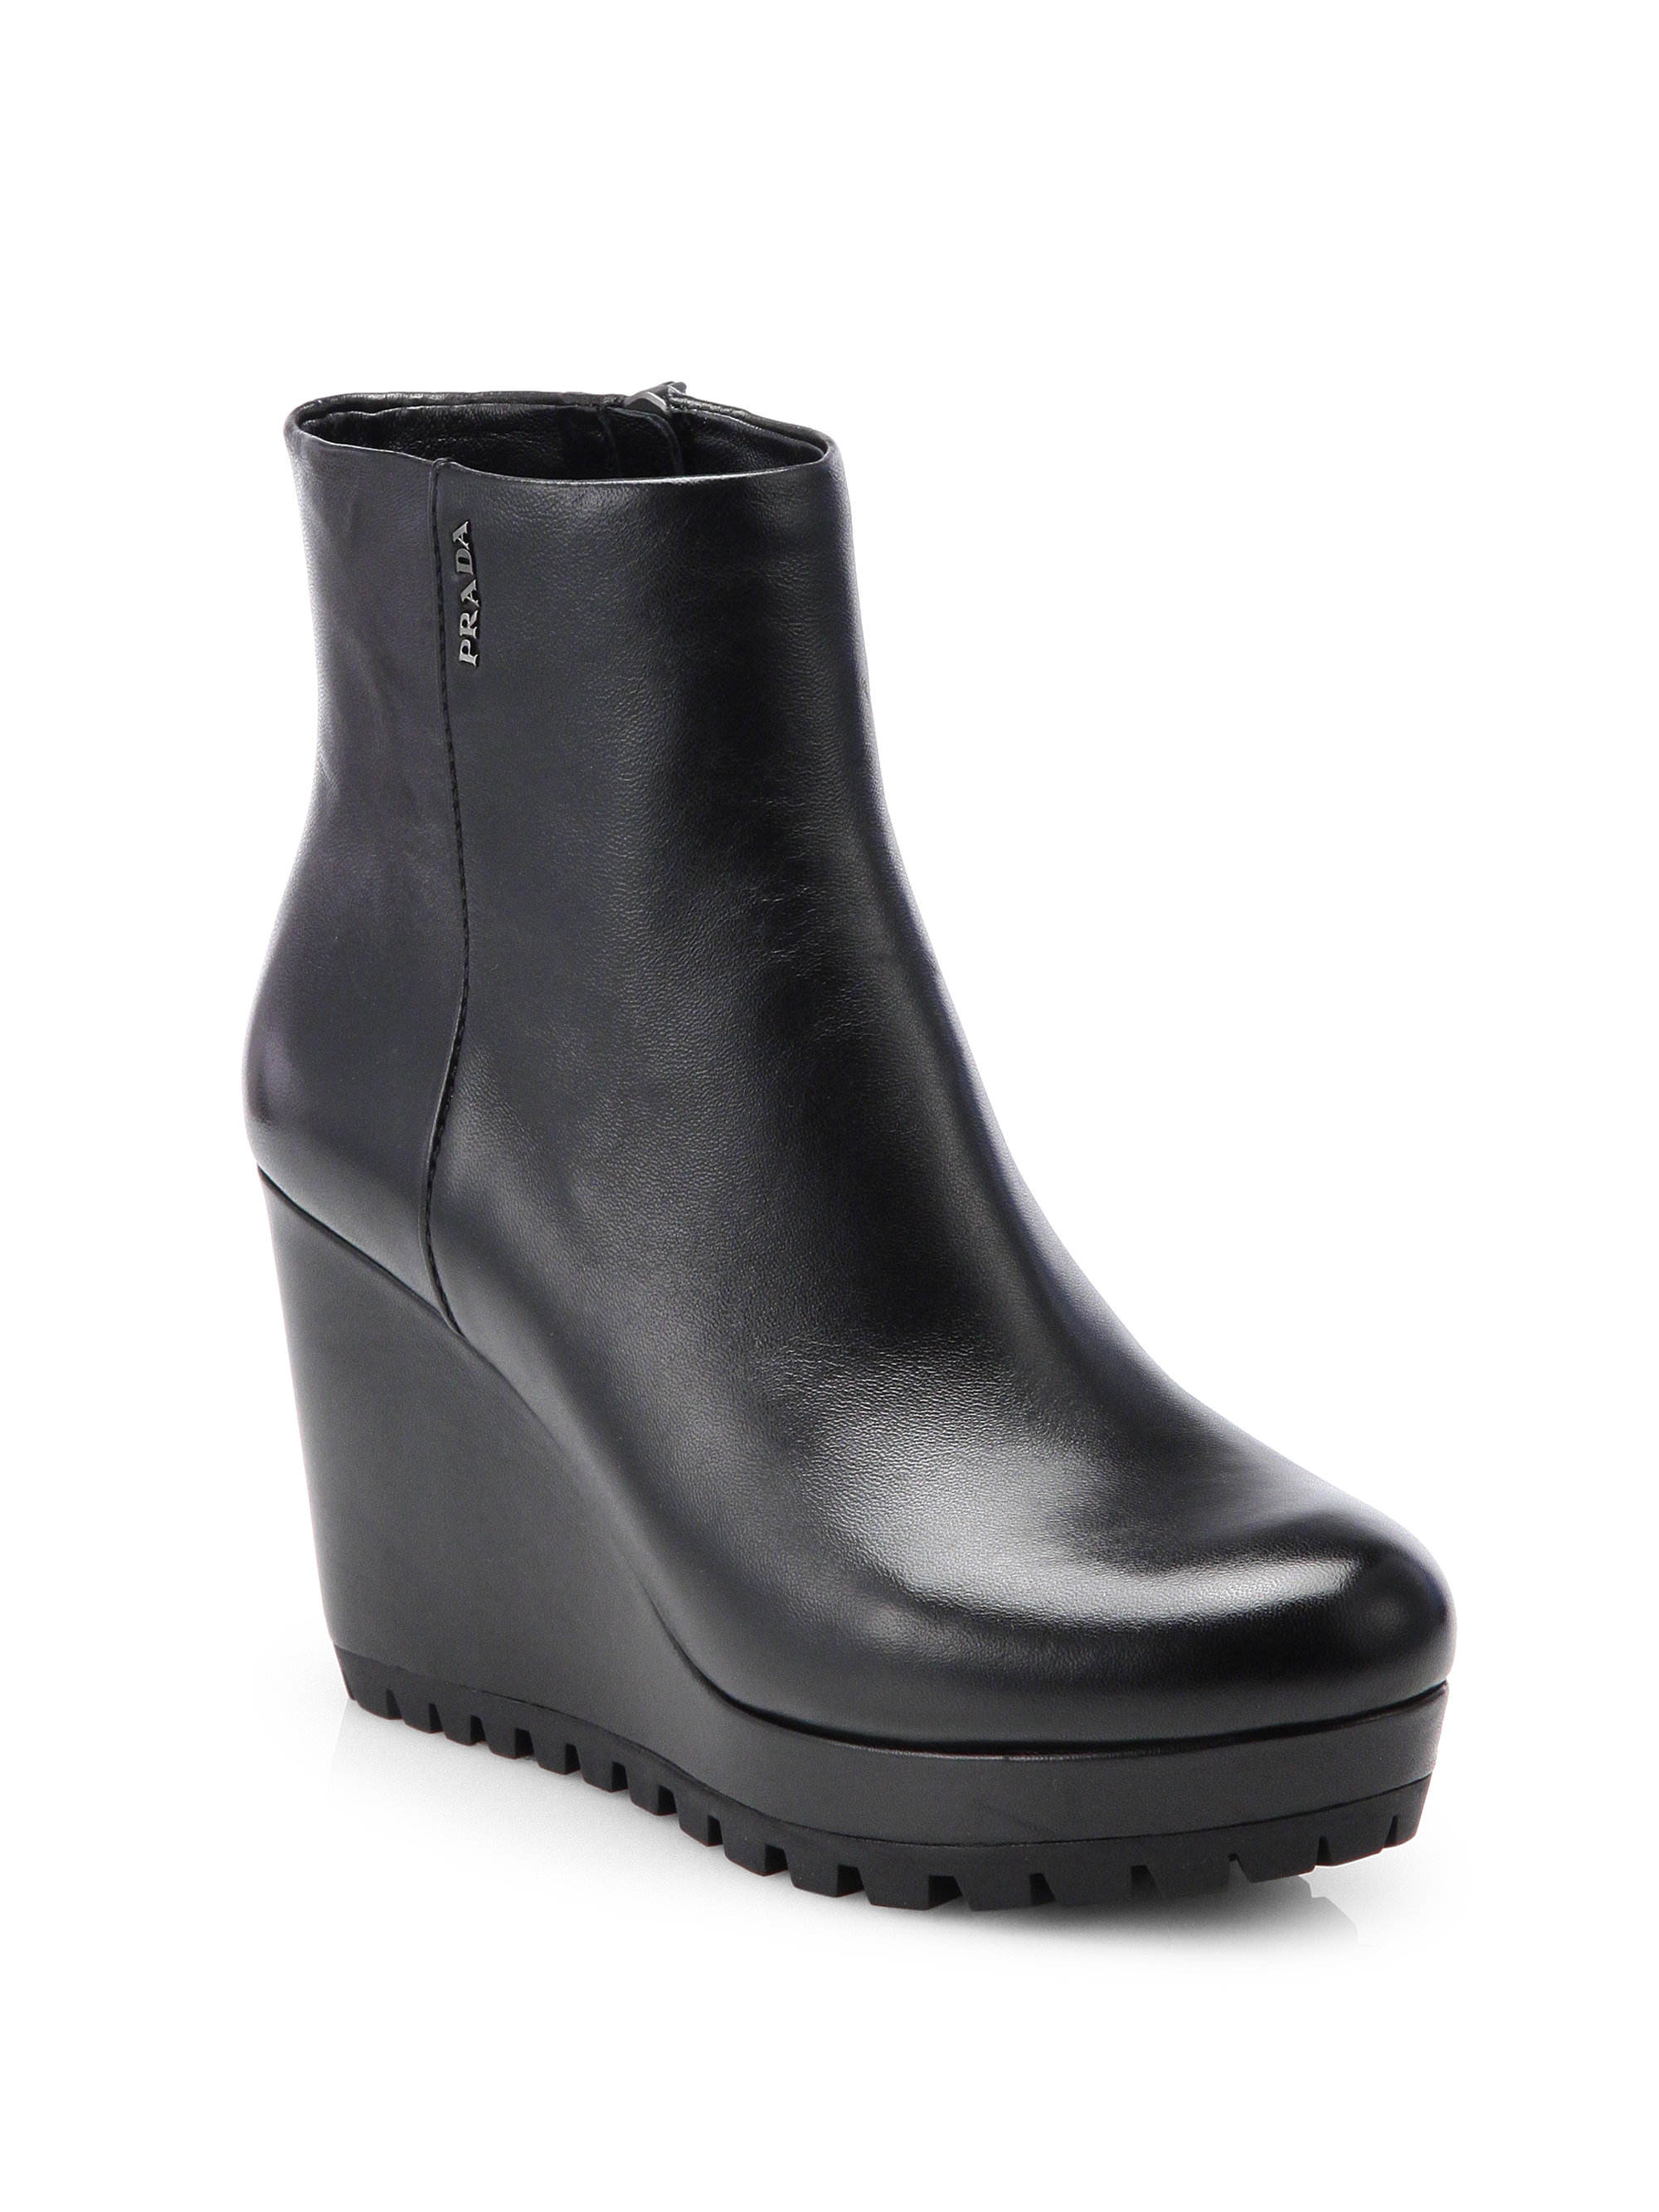 Prada Leather Wedge Ankle Boots in Black - Lyst